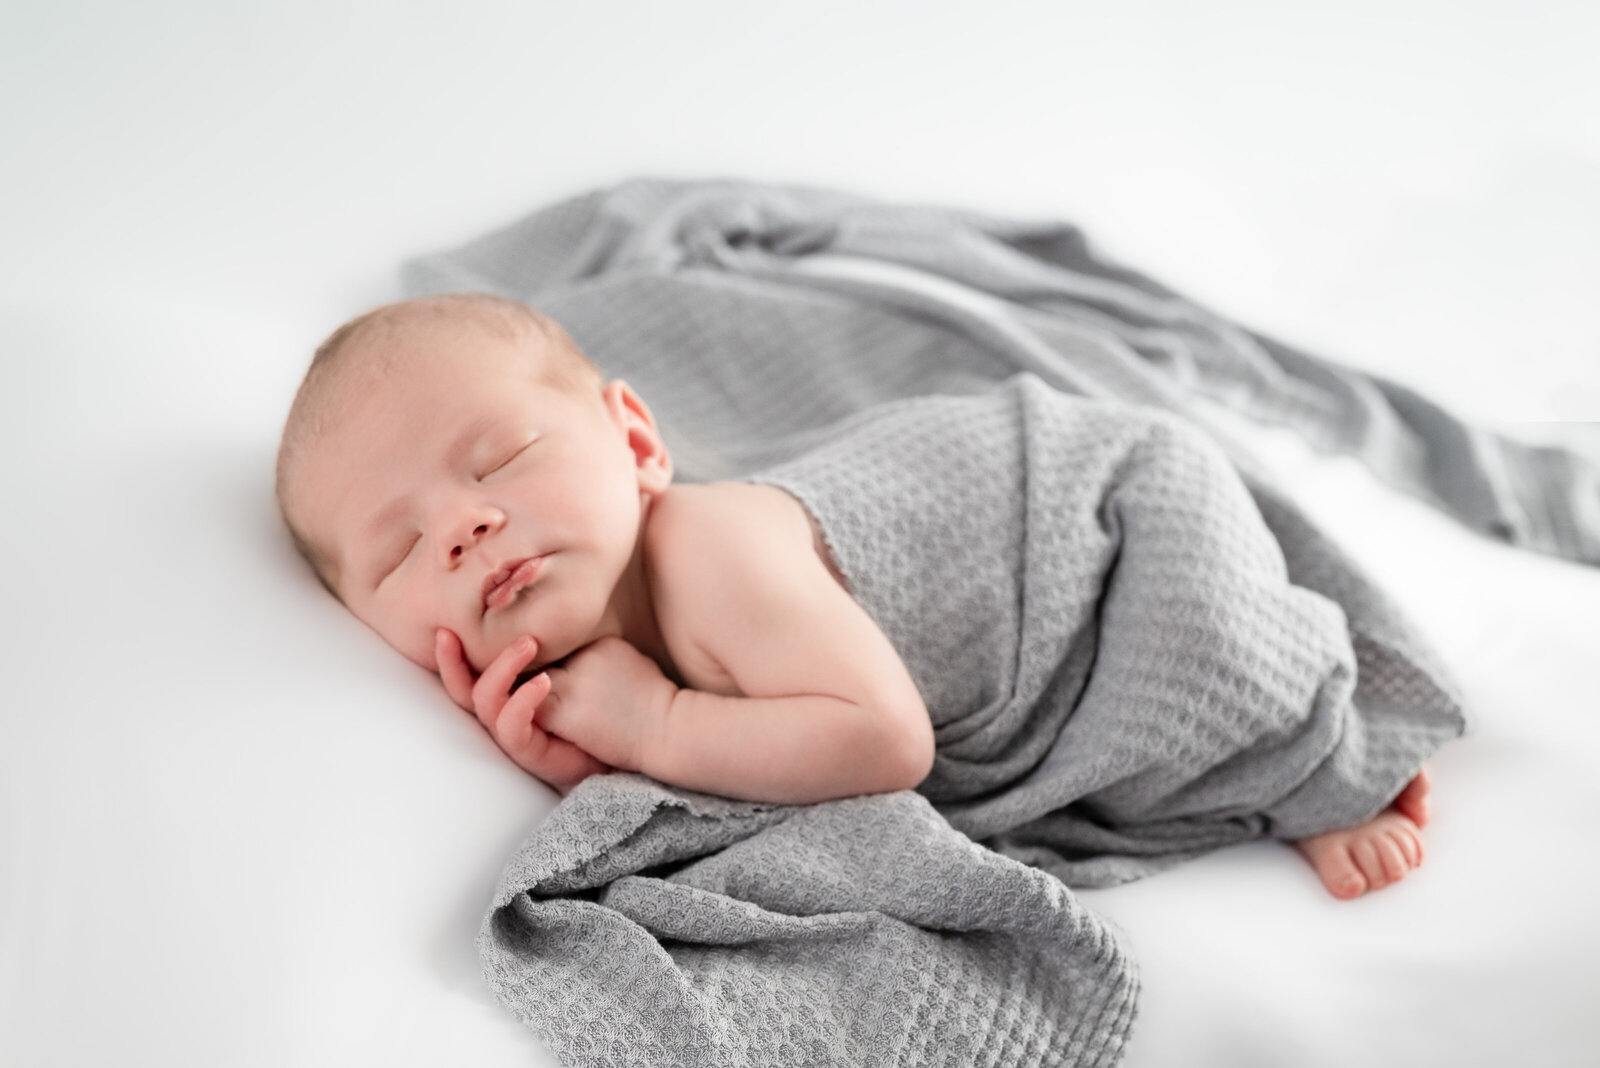 A newborn baby wrapped in a gray blanket and sleeping for his newborn photoshoot in Huntsville Alabama